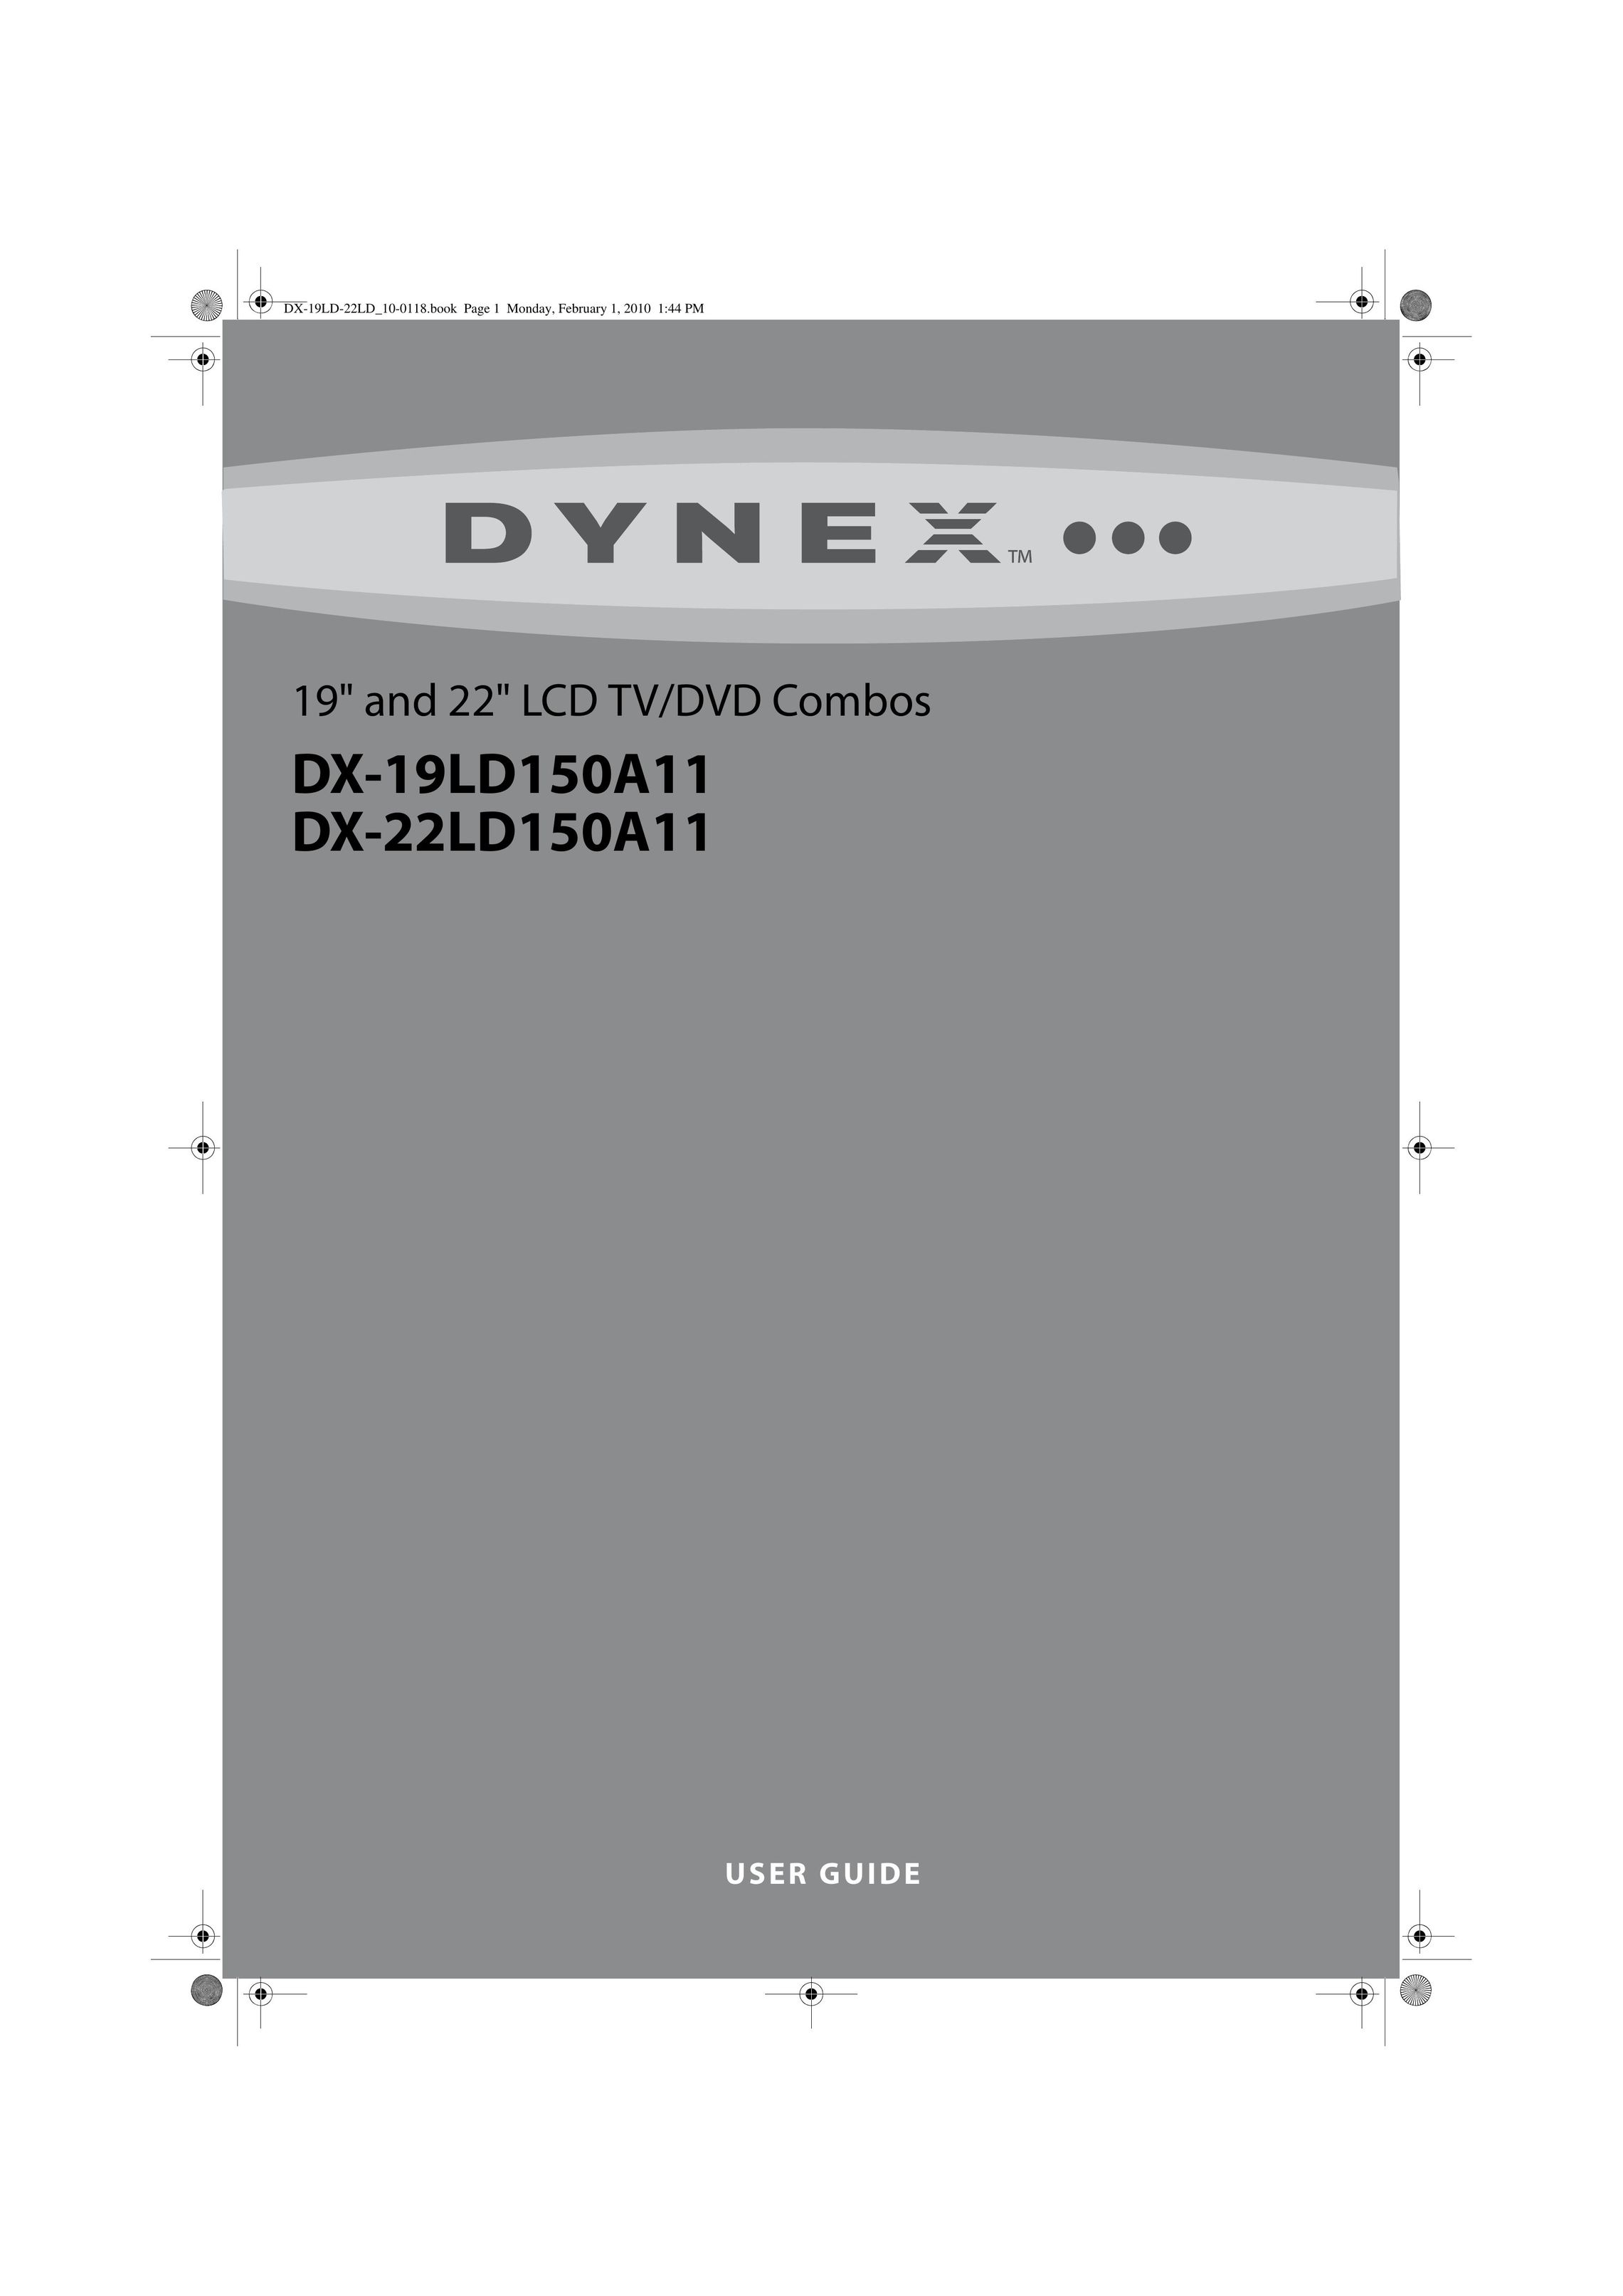 Dynex DX-22LD150A11 TV DVD Combo User Manual (Page 1)